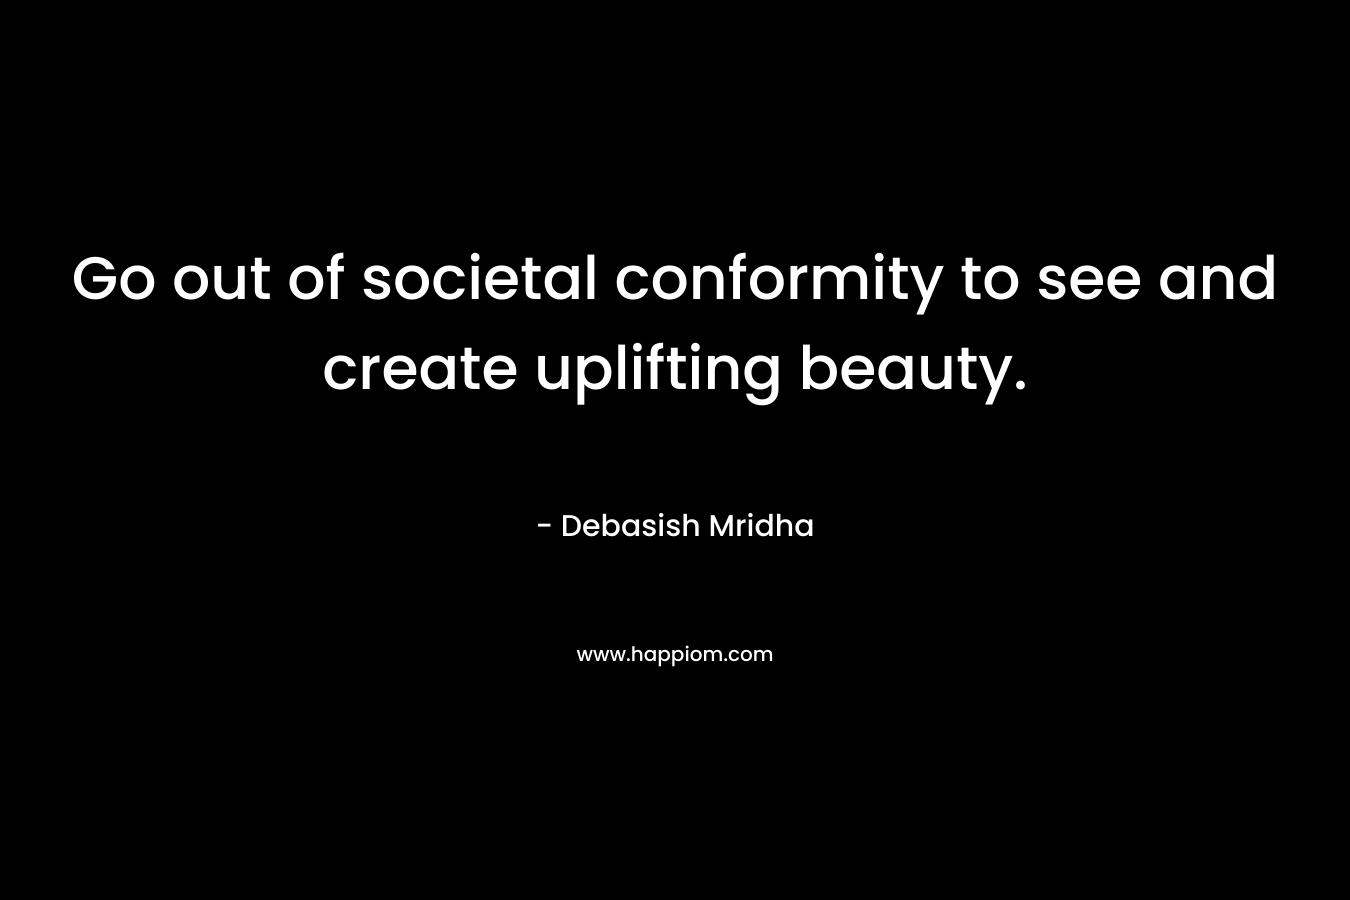 Go out of societal conformity to see and create uplifting beauty.